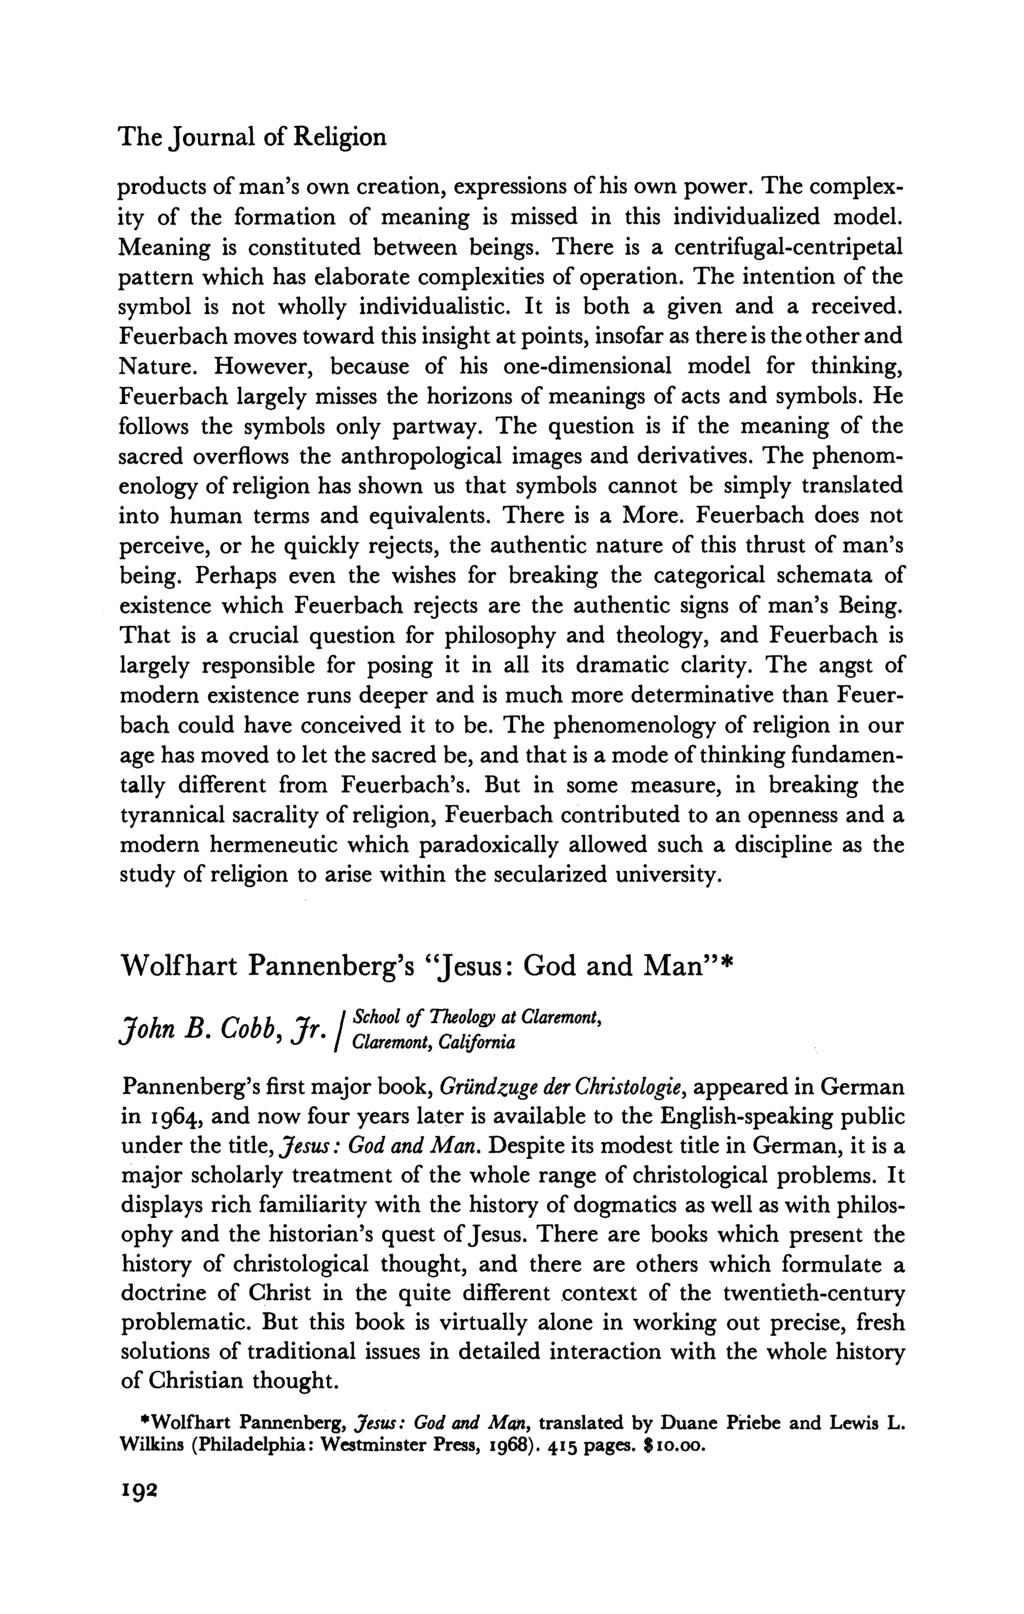 The Journal of Religion products of man's own creation, expressions of his own power. The complexity of the formation of meaning is missed in this individualized model.